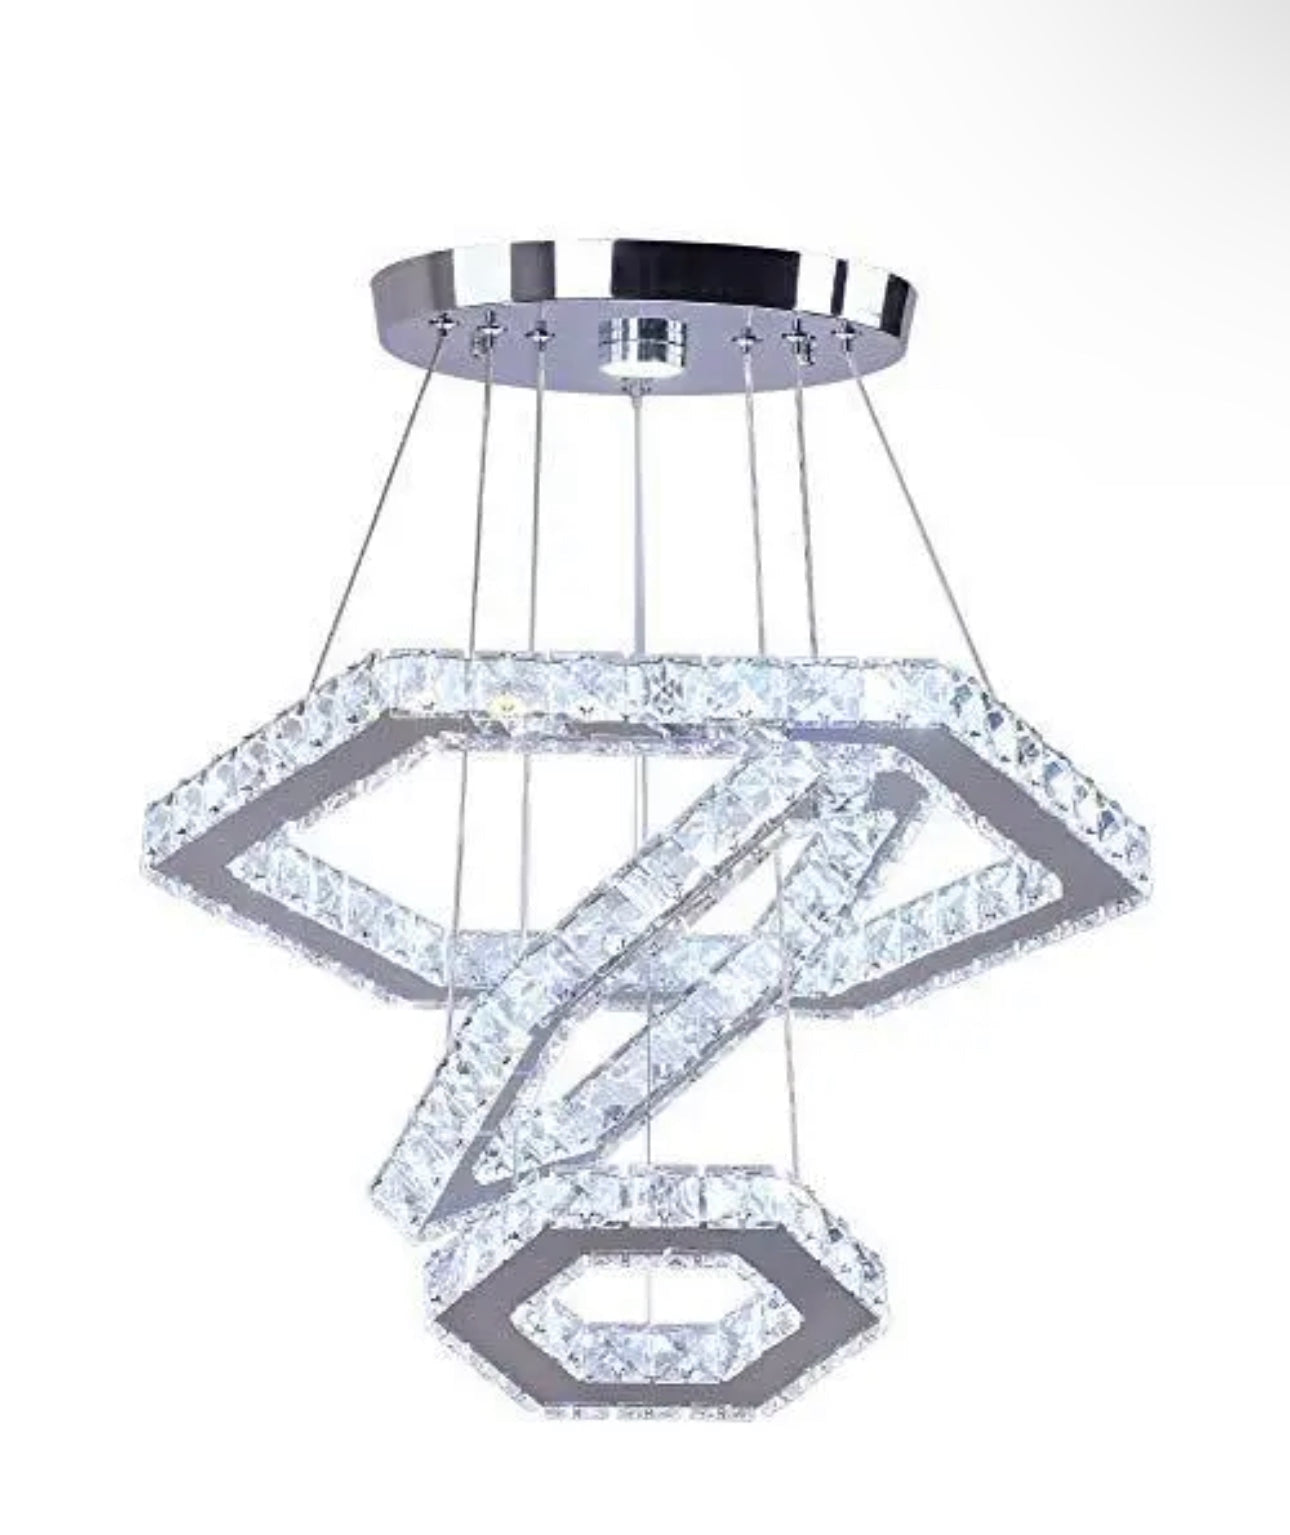 Silver Crystal Chandelier With Three Rings - Unparalleled Luxury For Your Living Room Hotel Semi - flush Mounts